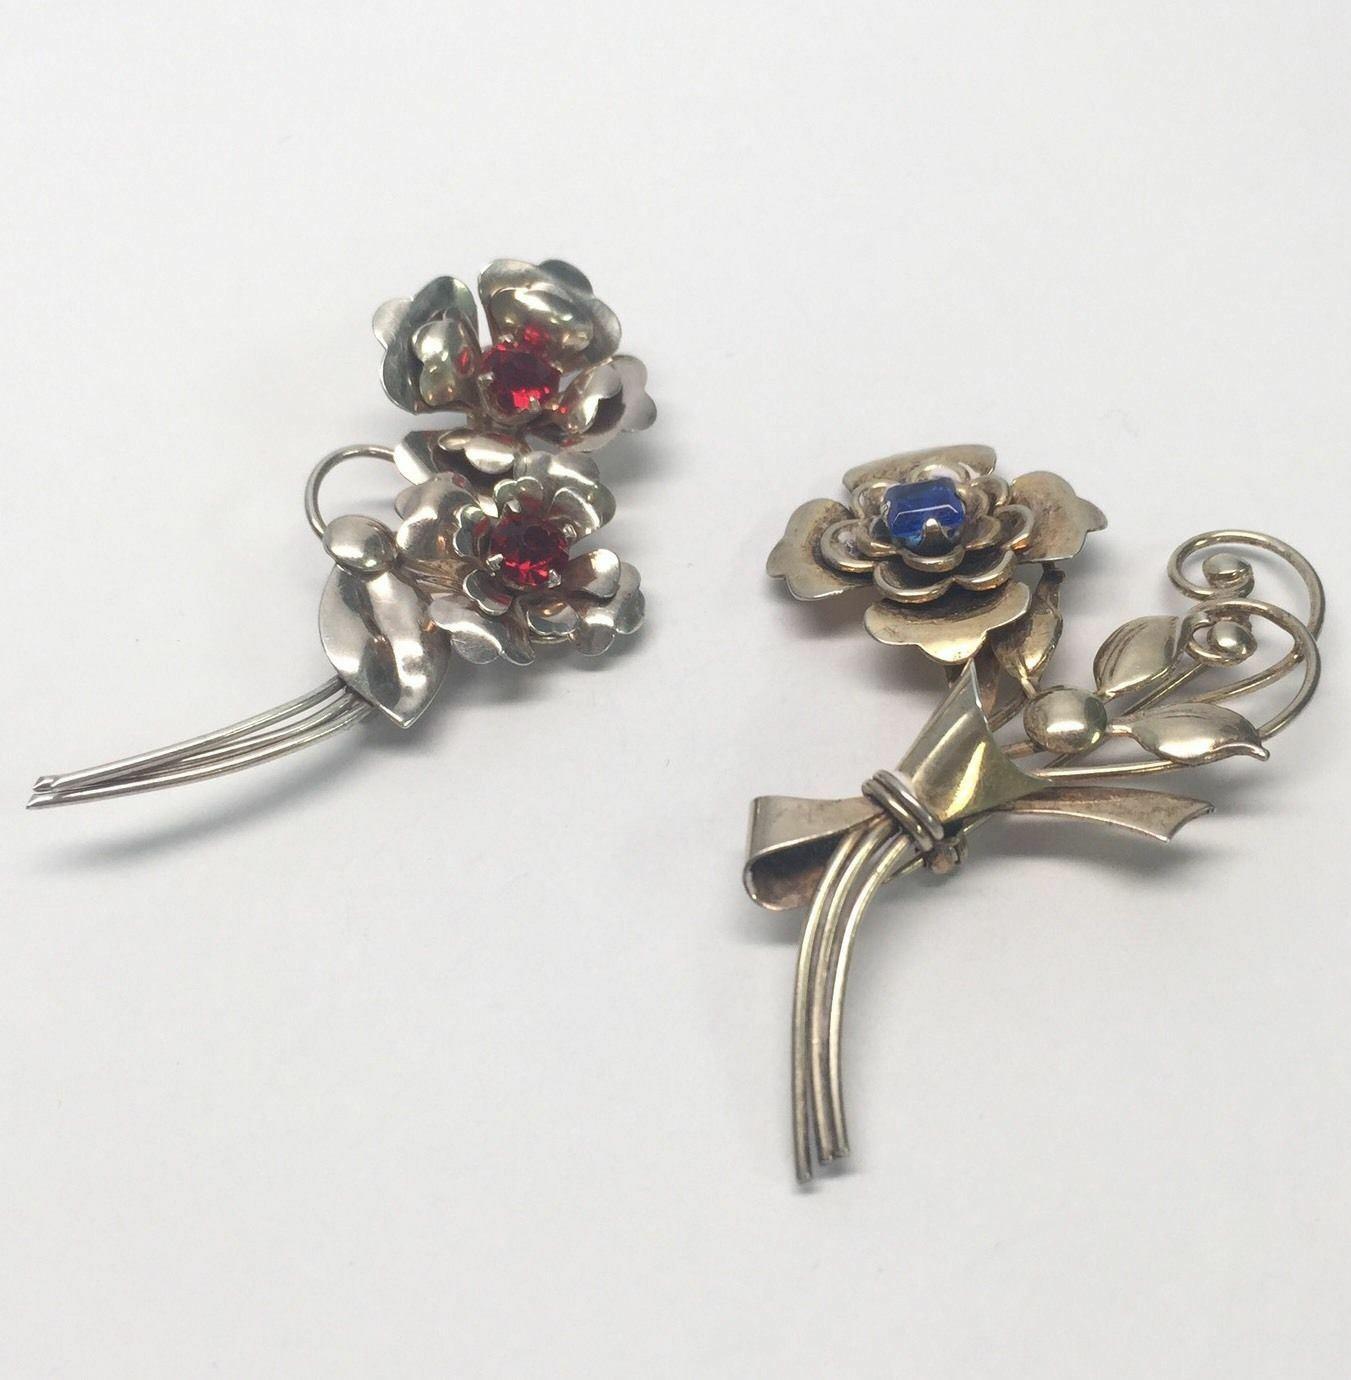 Harry Iskin 1940's sterling silver pair of flower pins/brooches. These brooches include red and blue rhinestones set in the center of the flowers.

Marking: HI, STERLING.

Red pin measures approx. 2 1/2